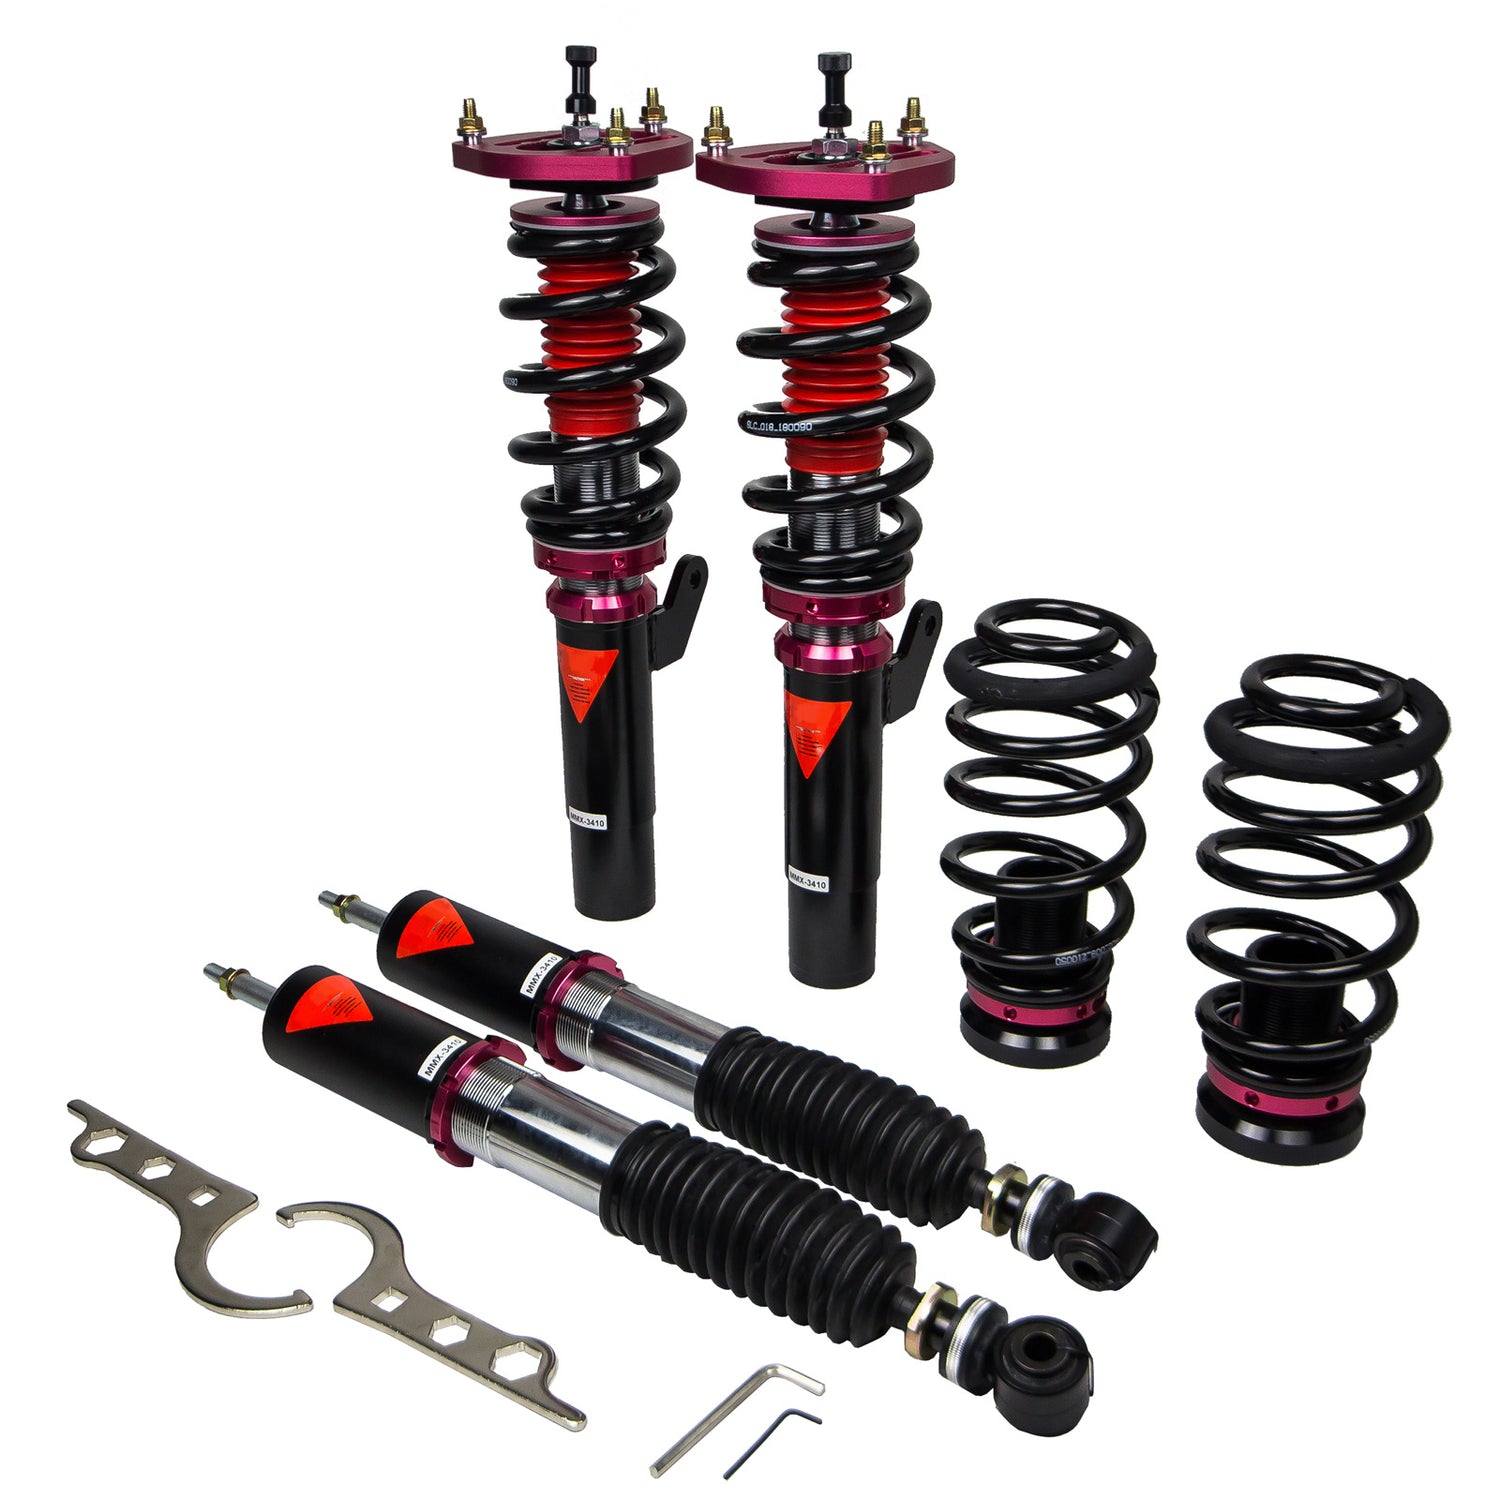 MMX3410 MAXX Coilovers Lowering Kit, Fully Adjustable, Ride Height, 40 Clicks Rebound Settings, Volkswagen Golf(MK5) 06-09(2WD)